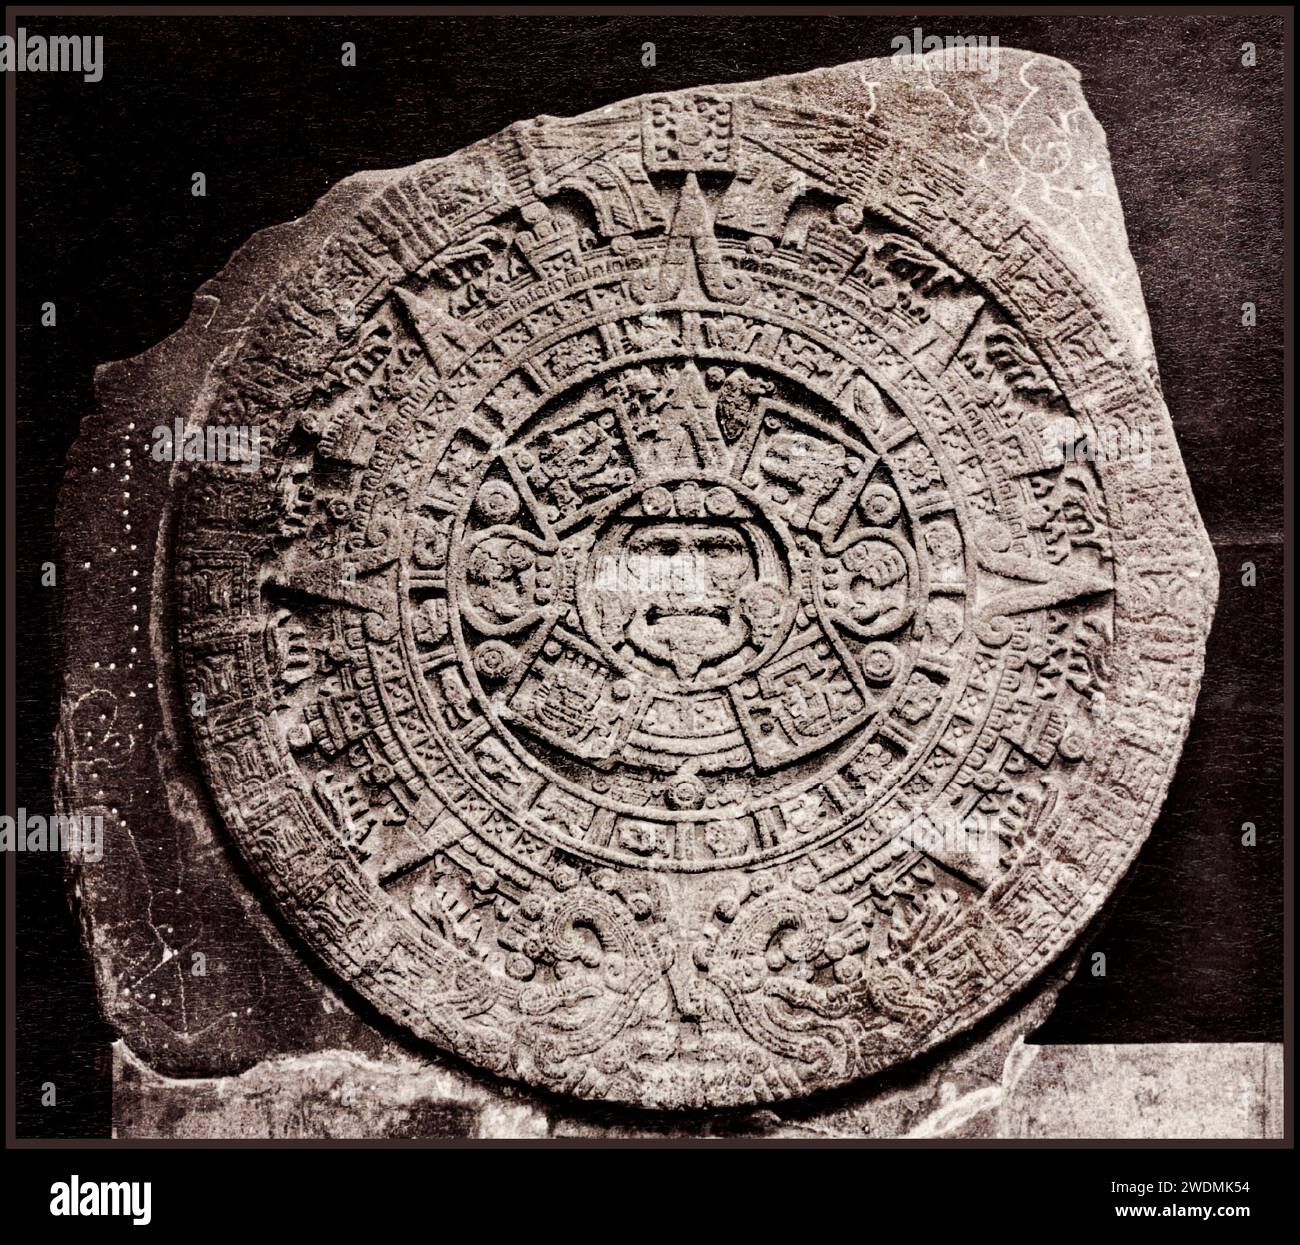 Aztec Calendar Stone 1790 ca. 1885-ca. 1895 (photograph): Mexico City, Distrito Federal, Mexico Mexico Aztec albumen print Calendars Rock  reliefs (sculptures) museums (buildings)  interior views  Imaginary/Mythological creatures   The Aztec Calendar Stone, 'discovered in 1790, is a basaltic monolith. It weighs approximately 25 tons and is about 3.7 metres in diameter. In the Museo Nacional de Antropología, Mexico City.' (Source: Encyclopedia Britannica) Stock Photo